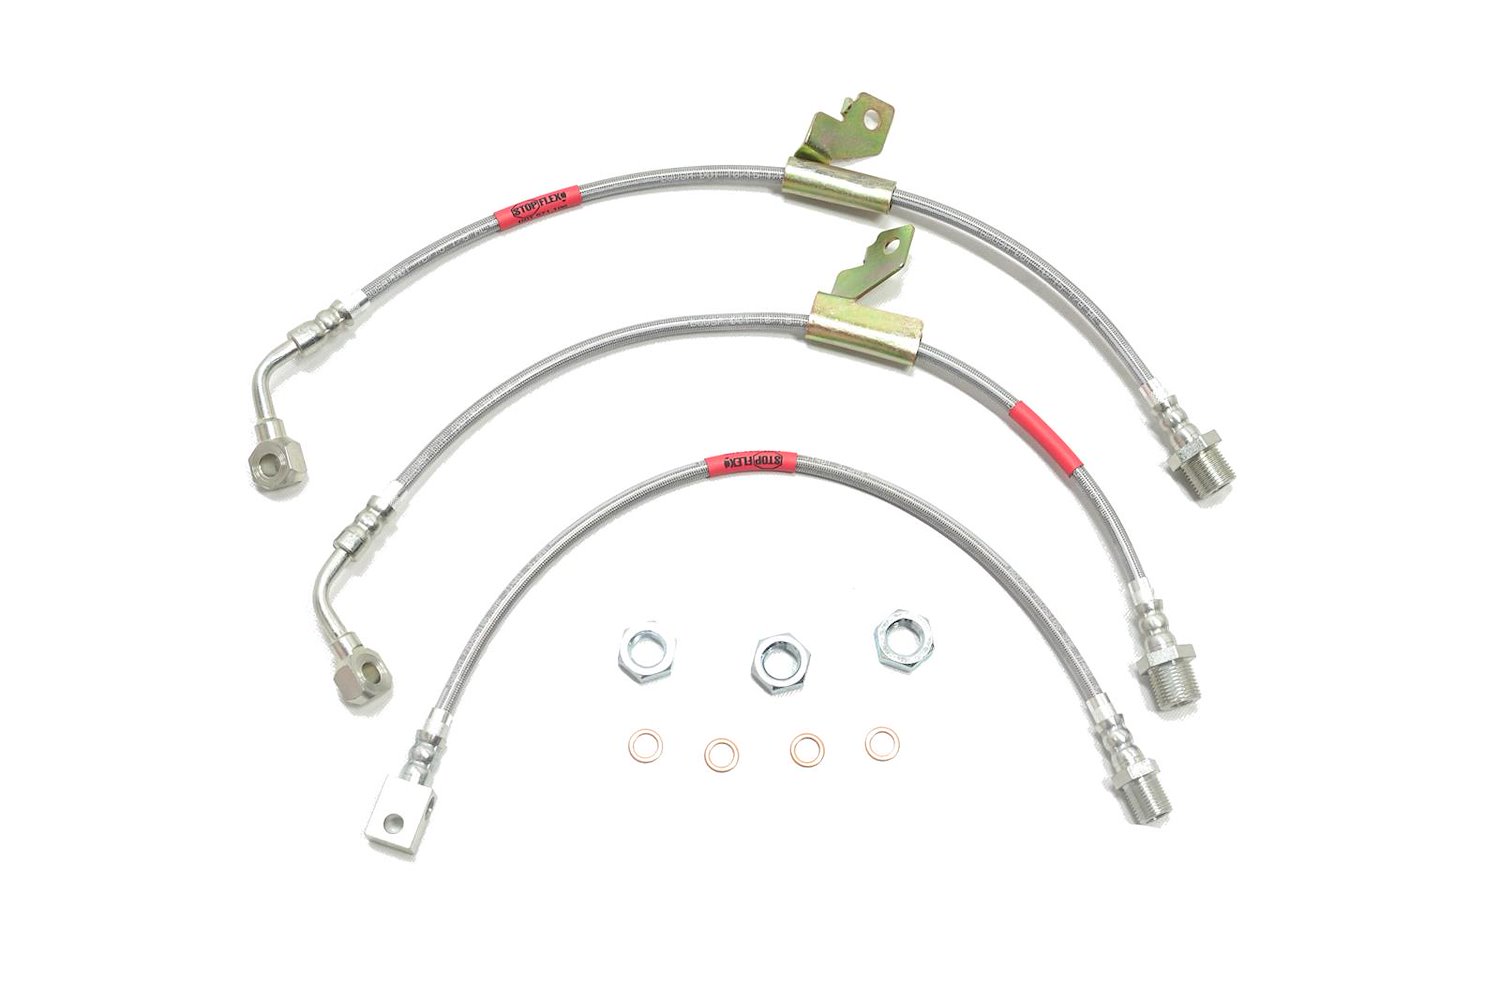 Chevy / GMC S series S15 StopFlex Brake Hose Kit 4WD Early 91 Front Disc/Rear Drum 3 Pc. -1982 1983